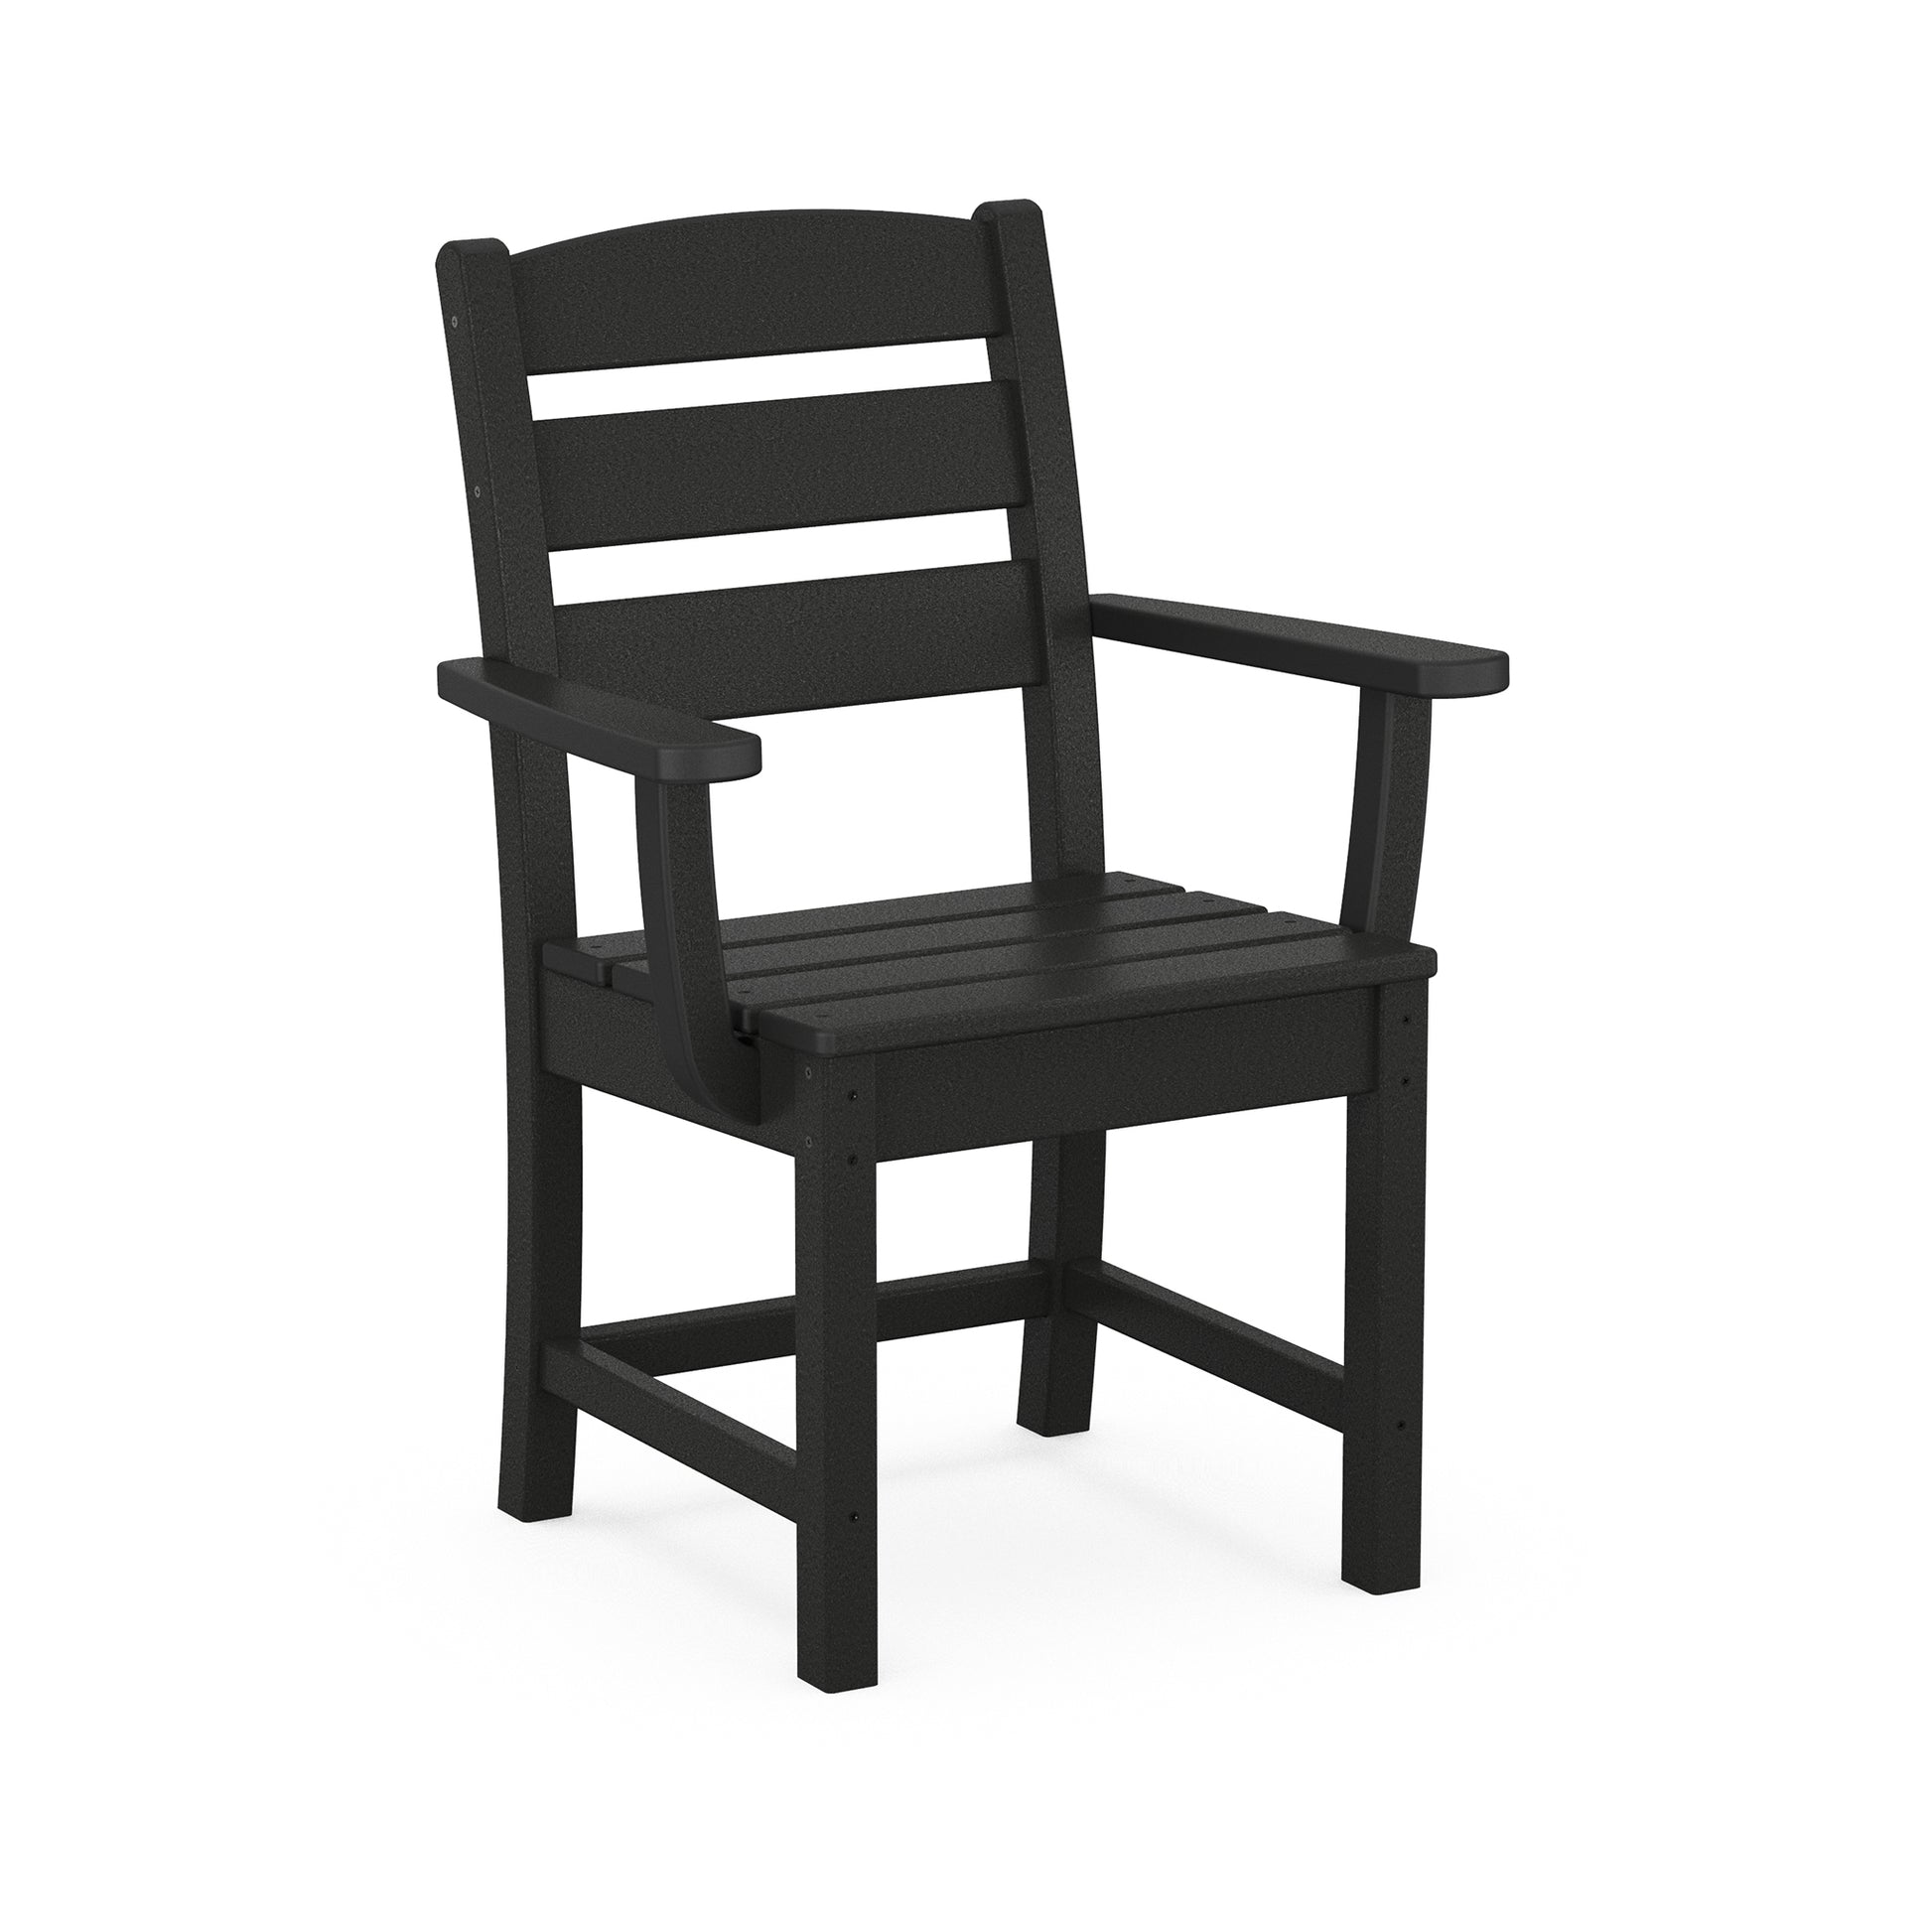 A black POLYWOOD Lakeside Dining Arm Chair made of synthetic material with a simple design featuring straight slats on the backrest and seat, and armrests, set against a plain white background.